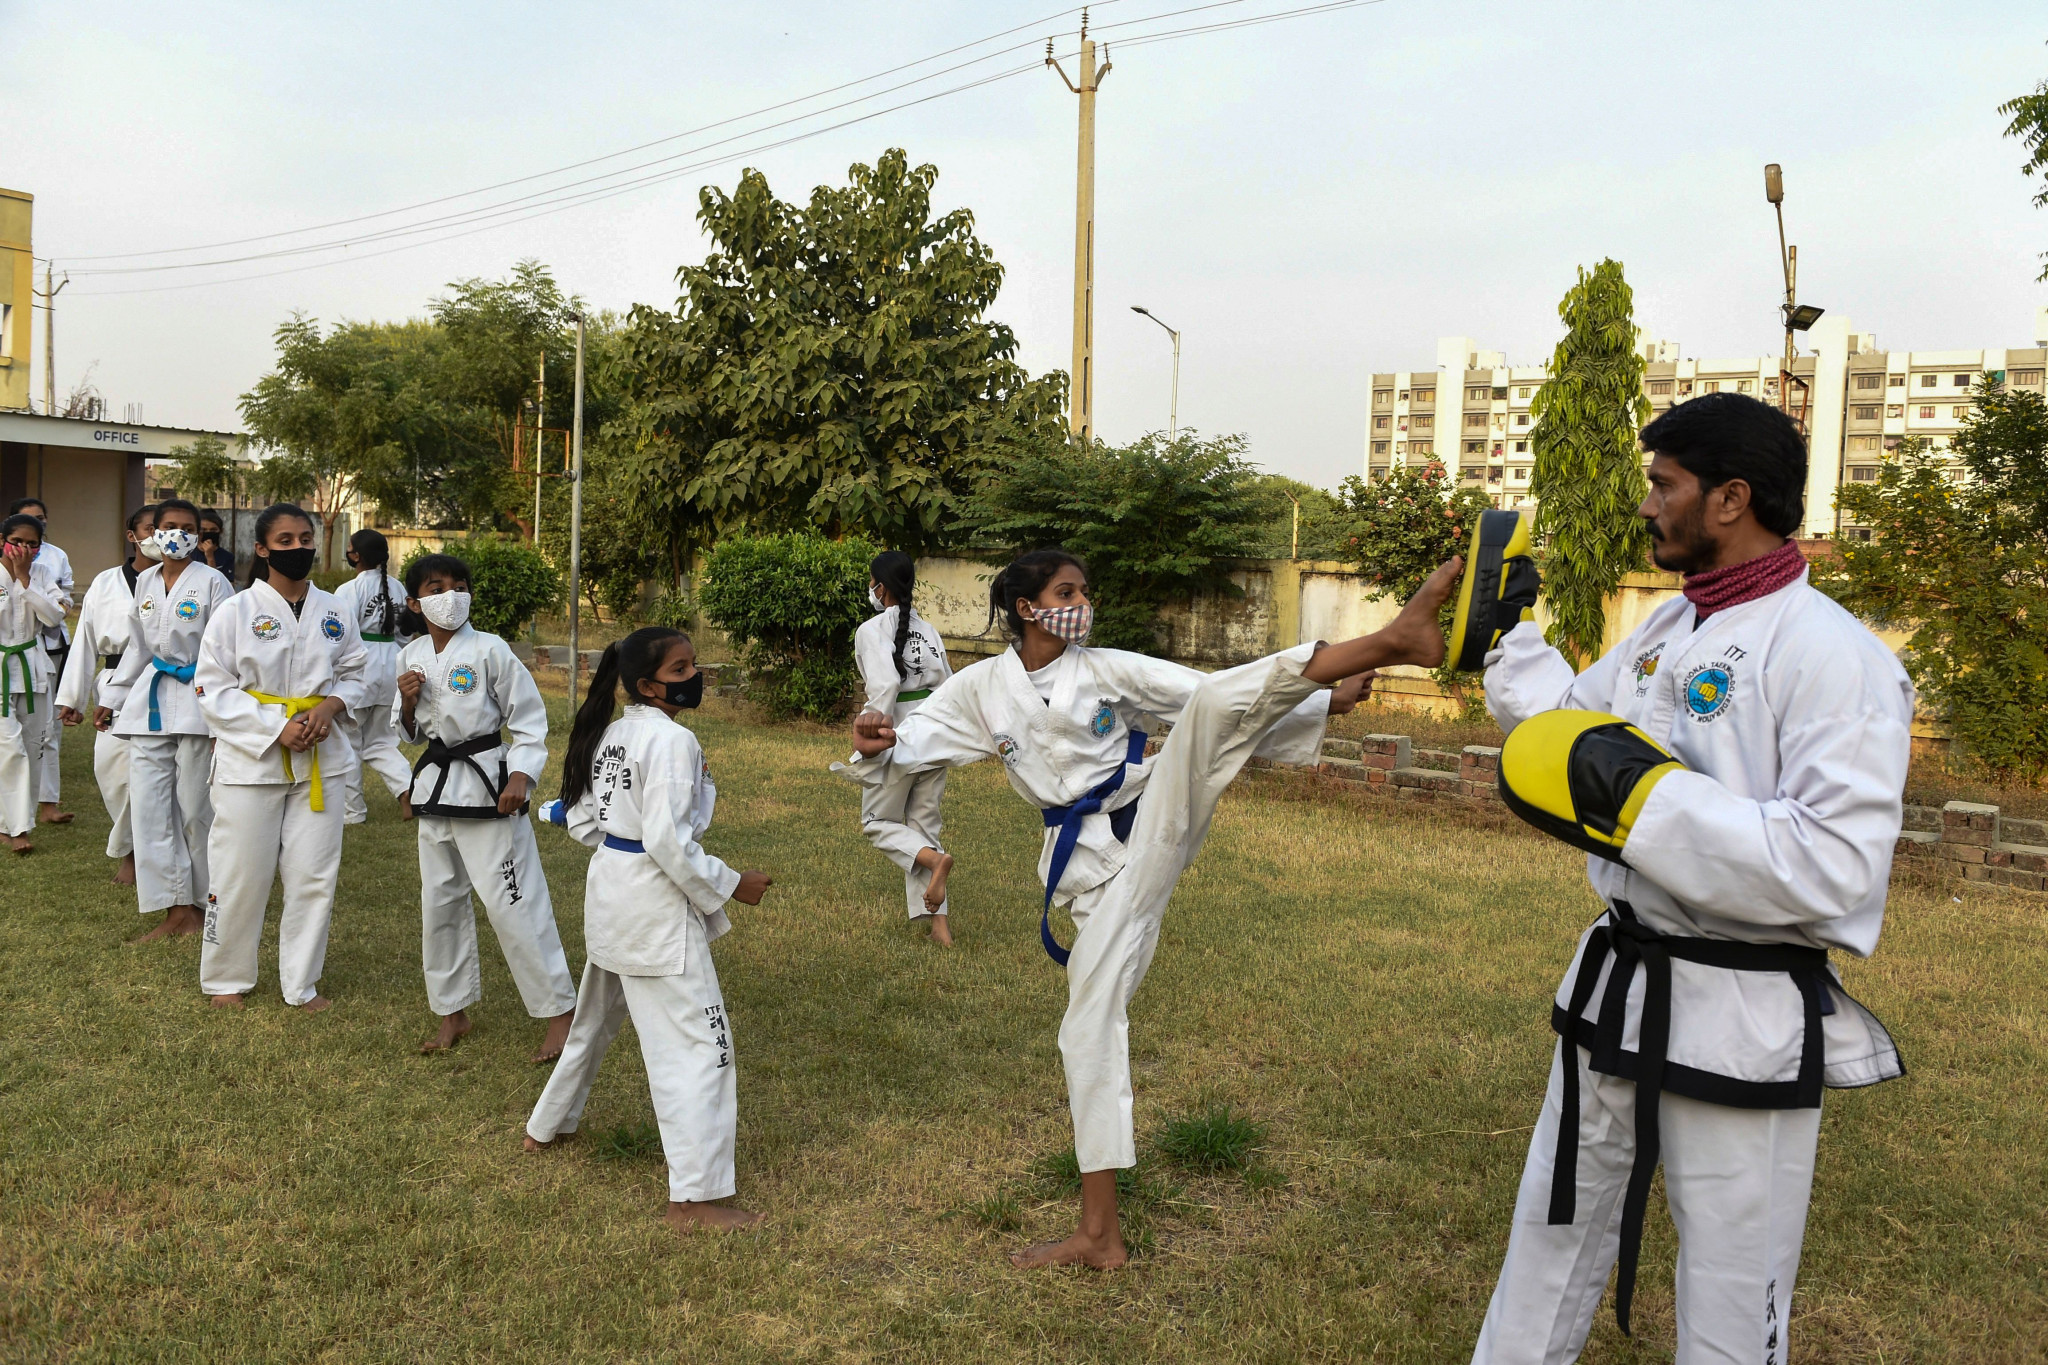 India signed an agreement with South Korea to have taekwondo athletes attend a three-week training programme at the KNSU ©Getty Images